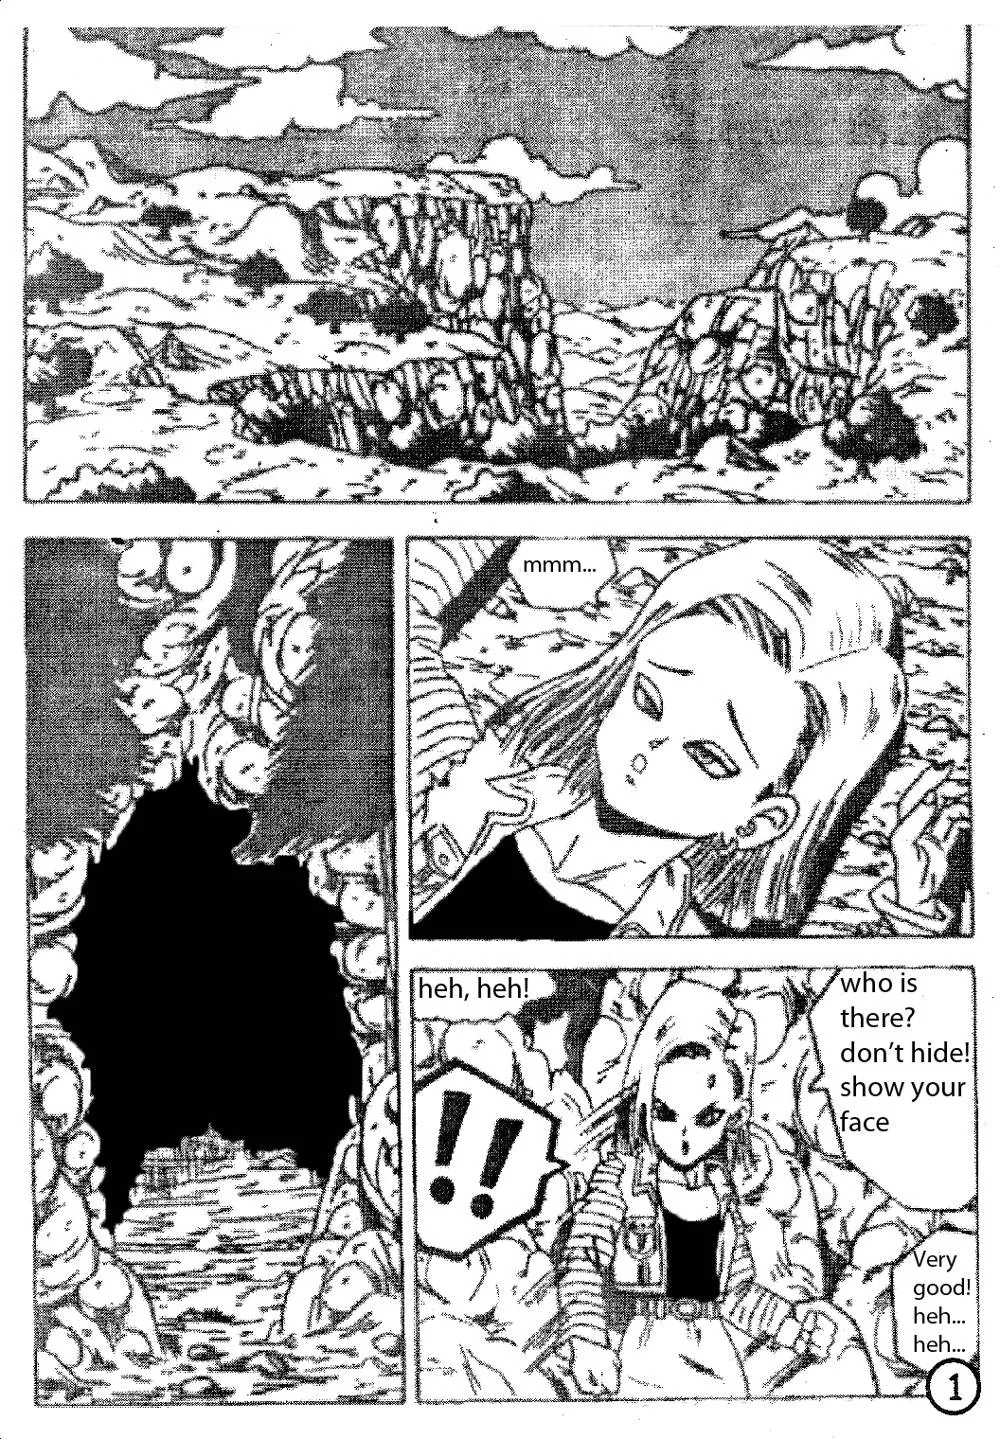 Dragon Ball Z,Trunks And Android 18 [English][第2页]